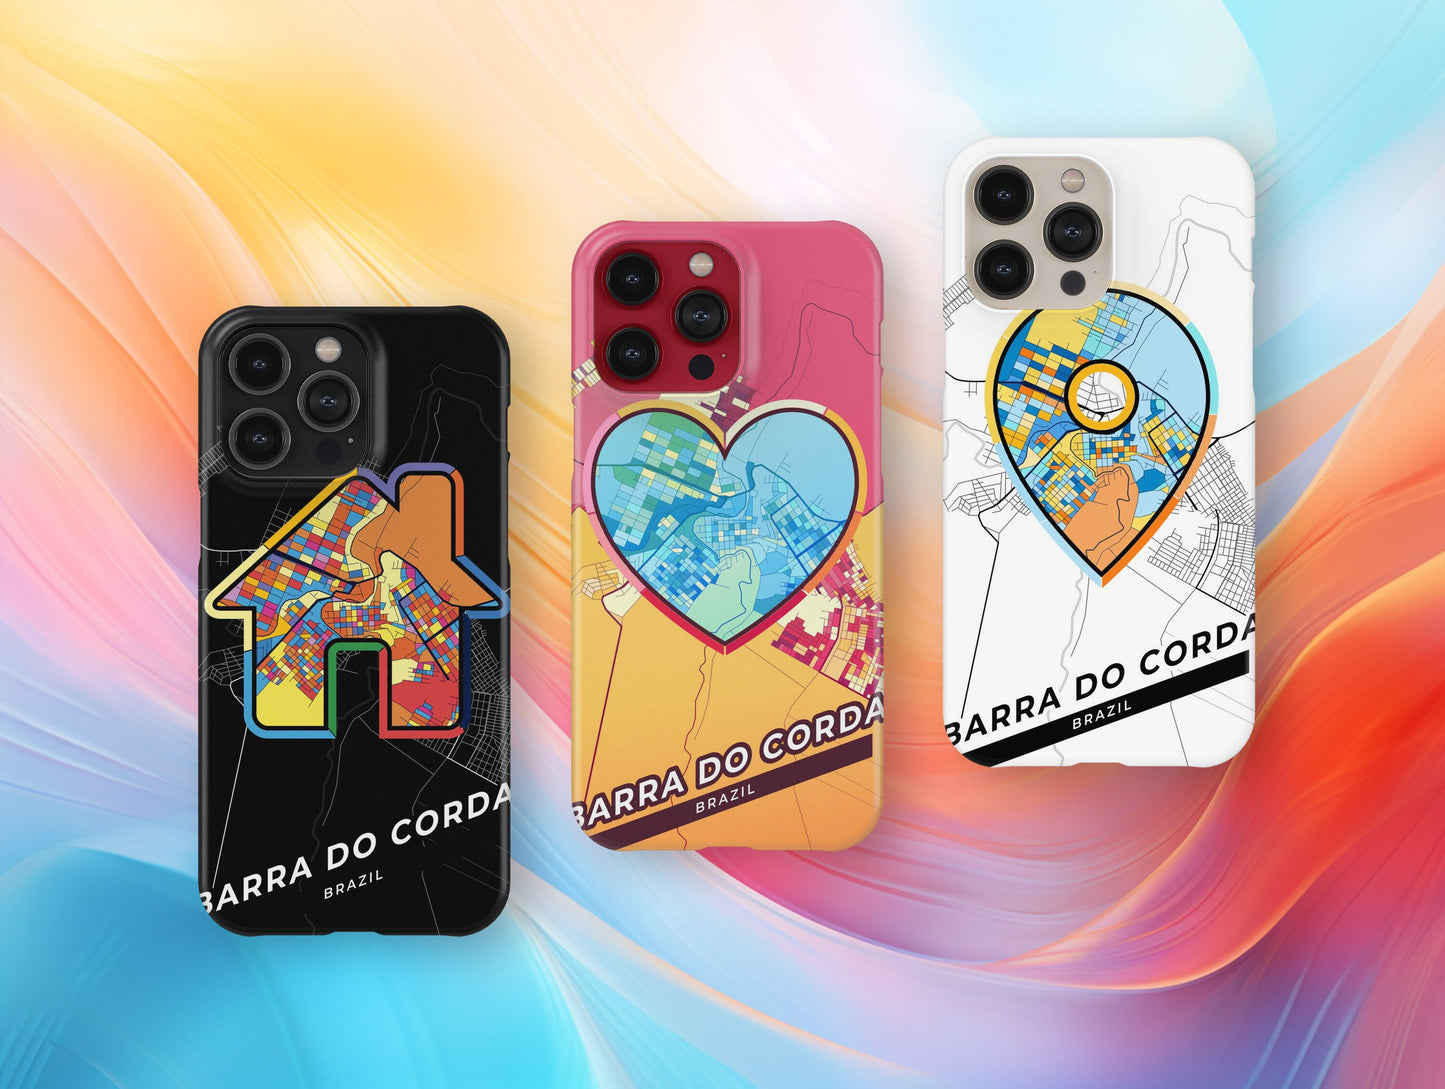 Barra Do Corda Brazil slim phone case with colorful icon. Birthday, wedding or housewarming gift. Couple match cases.